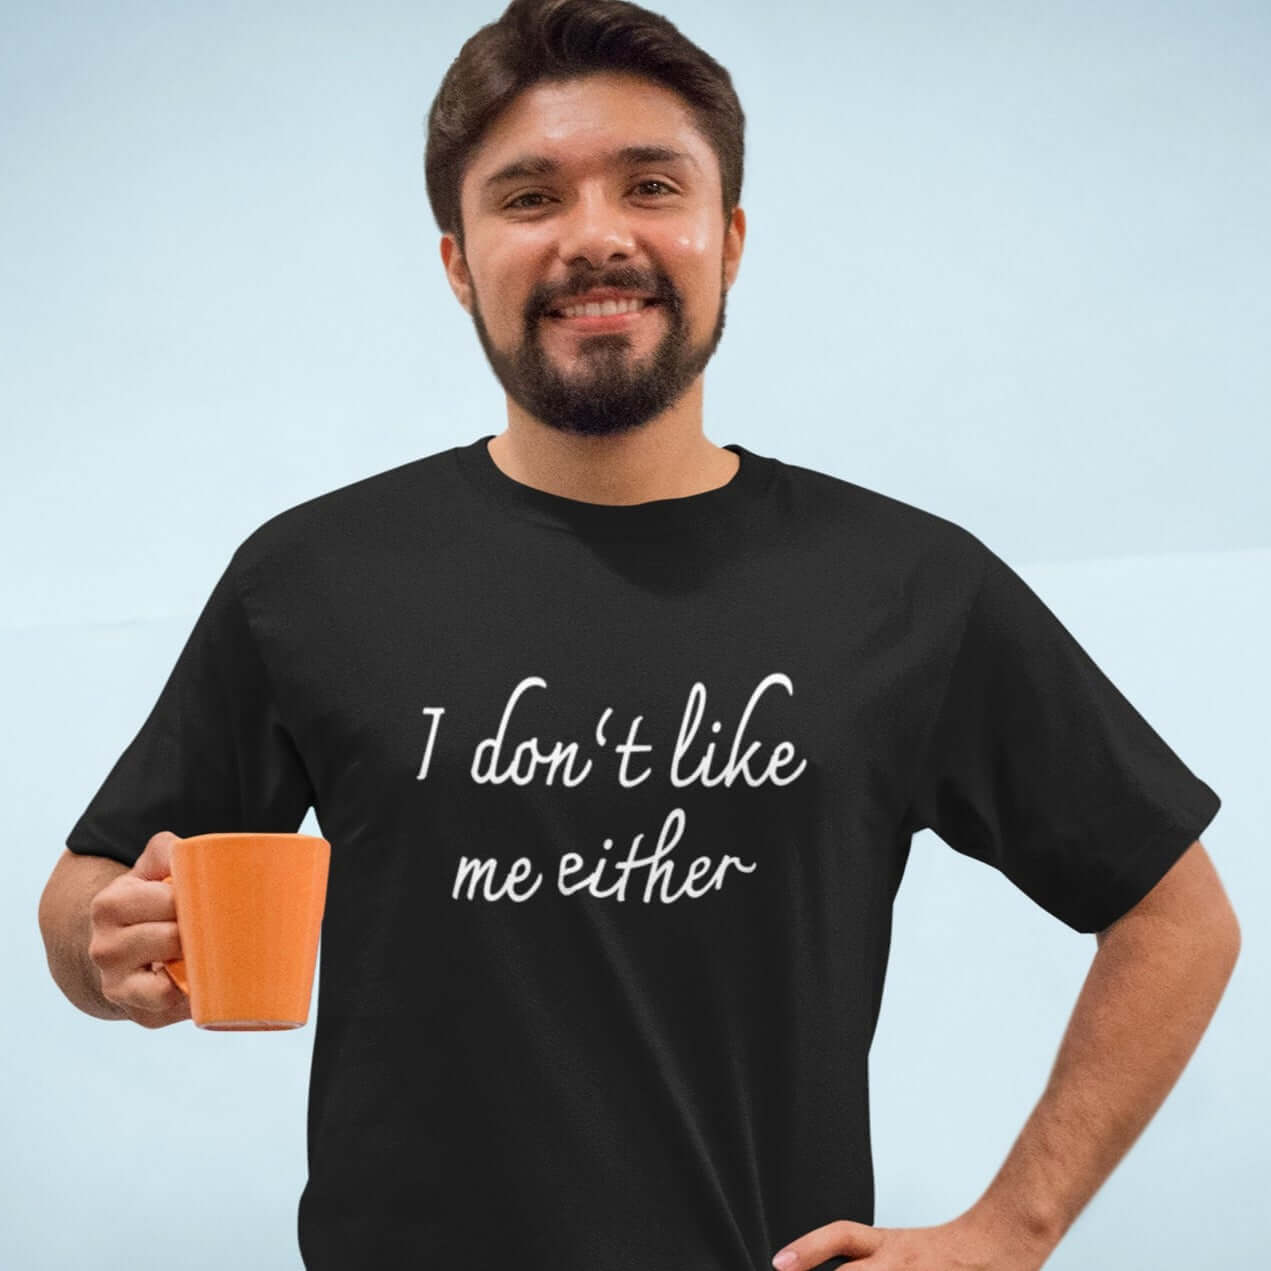 I don't like me either funny sarcastic self deprecating humor  T-shirt